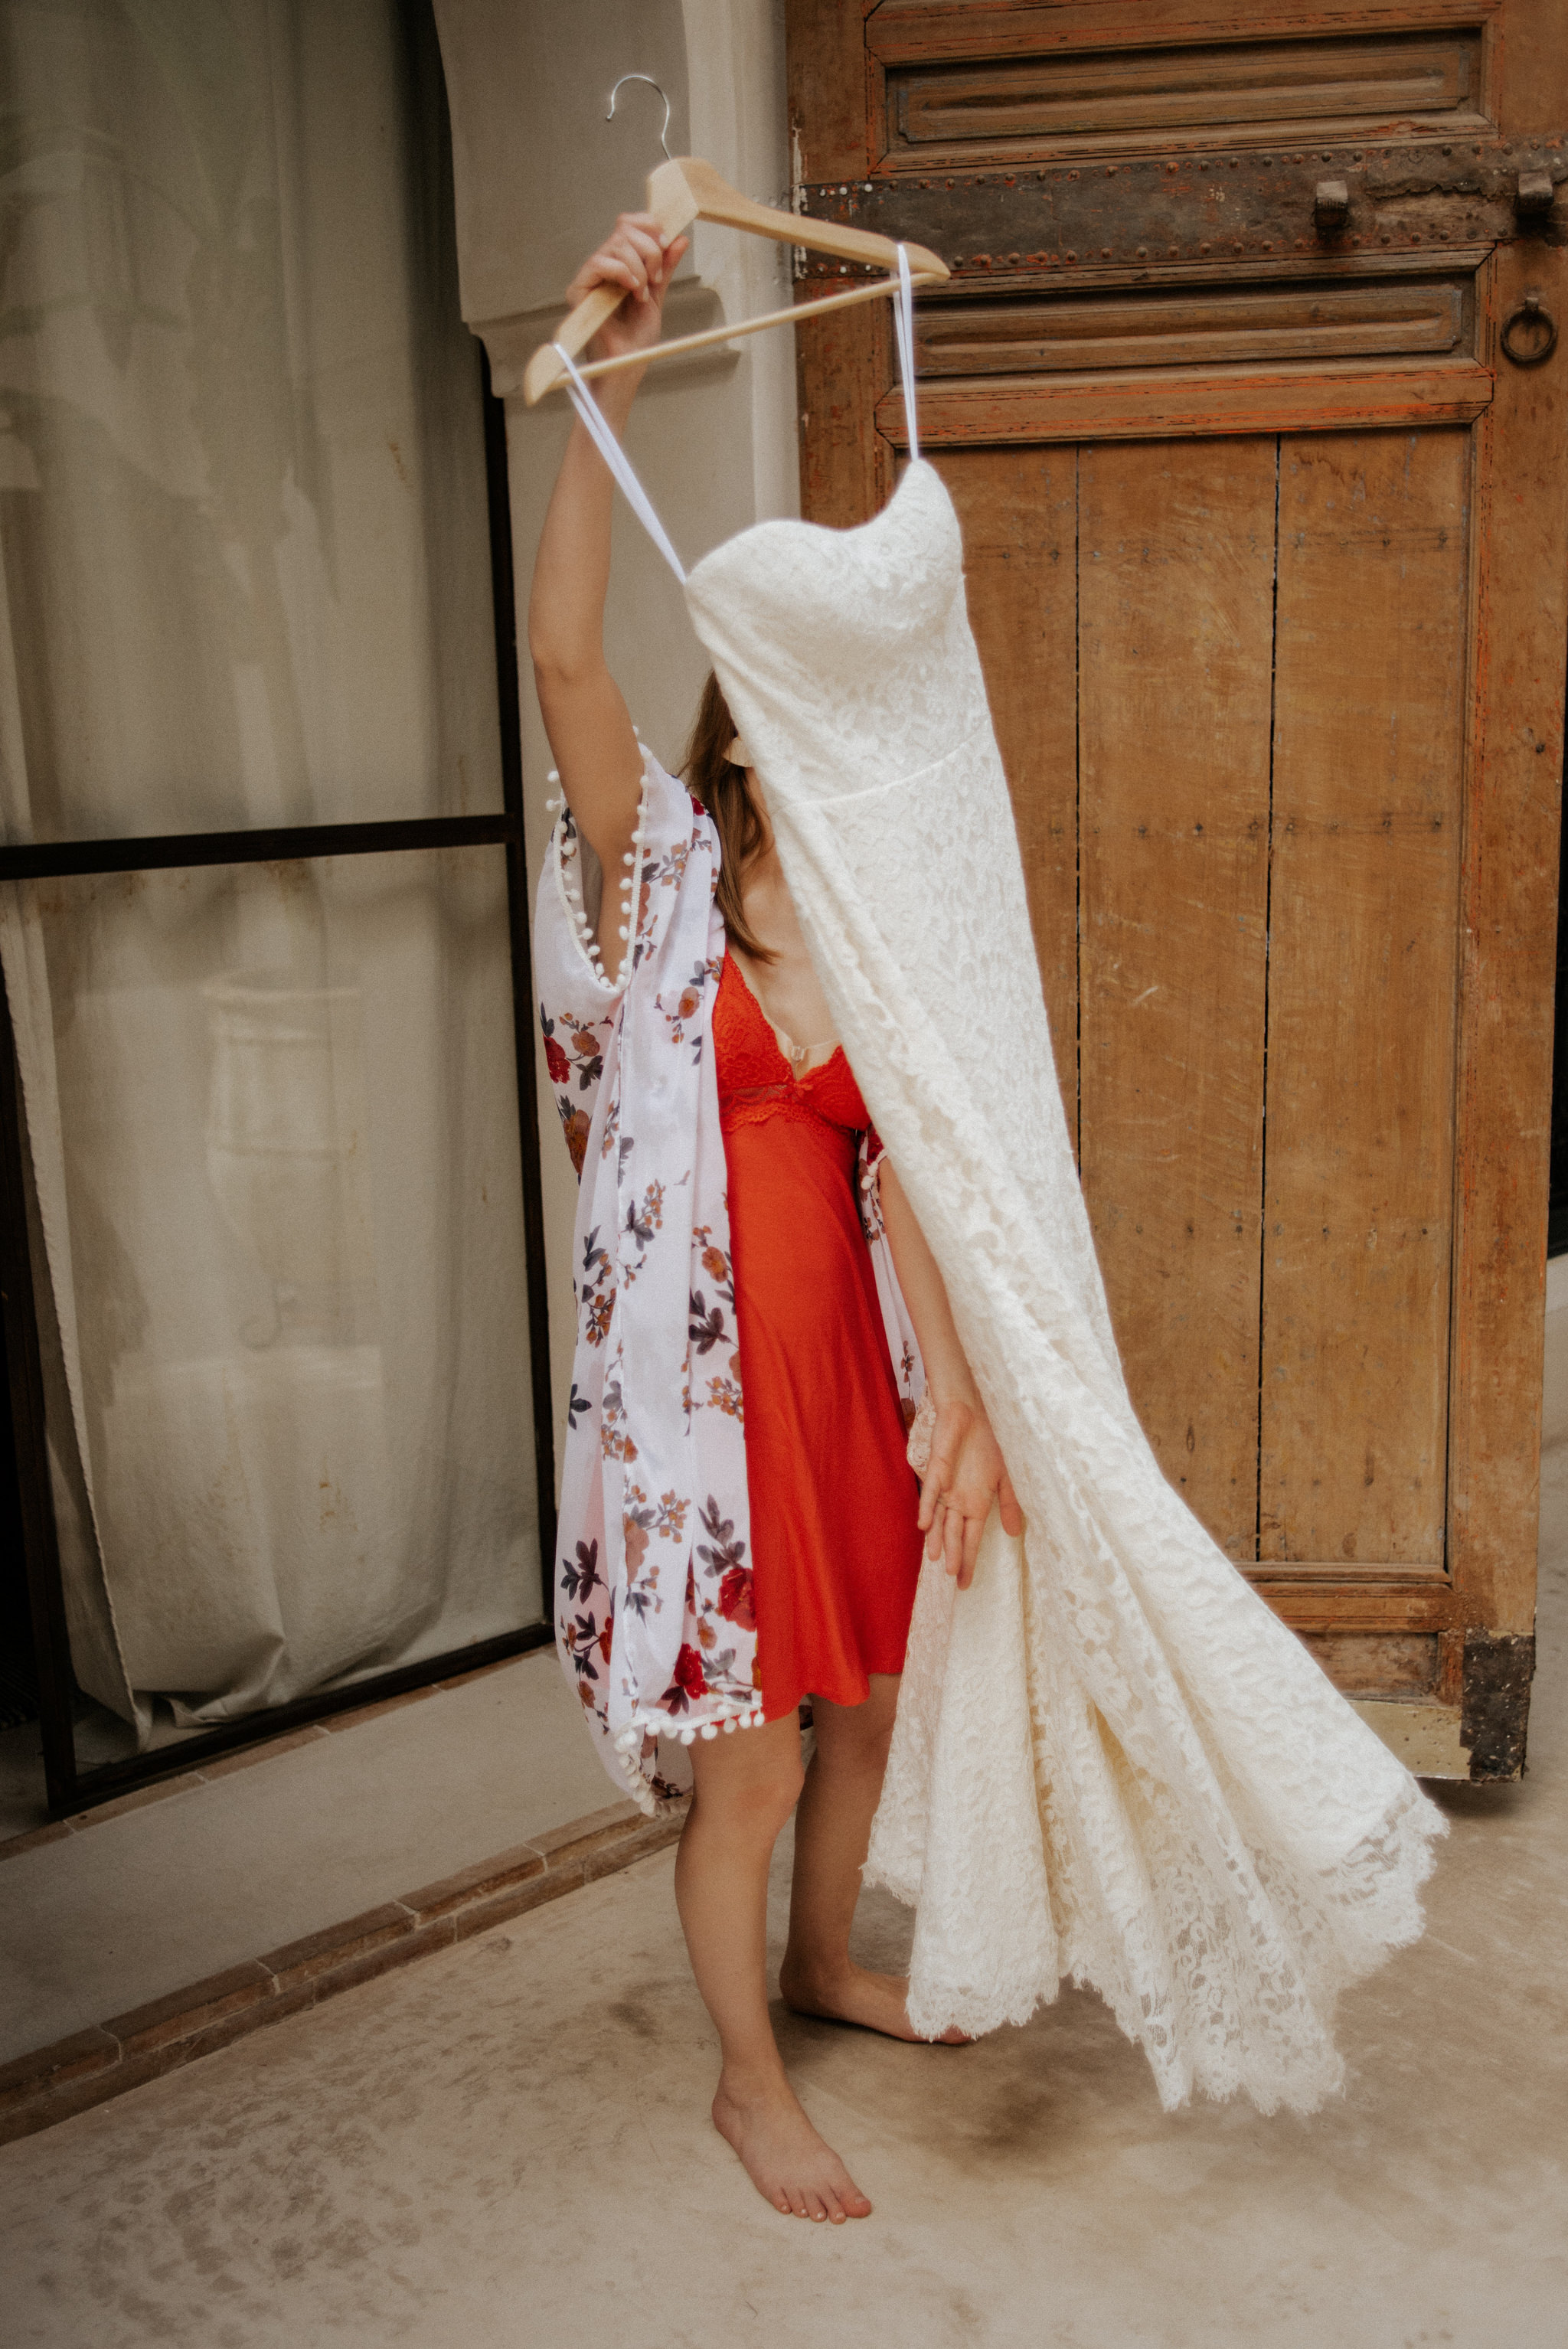 Bride holding dress, about to get ready for Morocco elopement